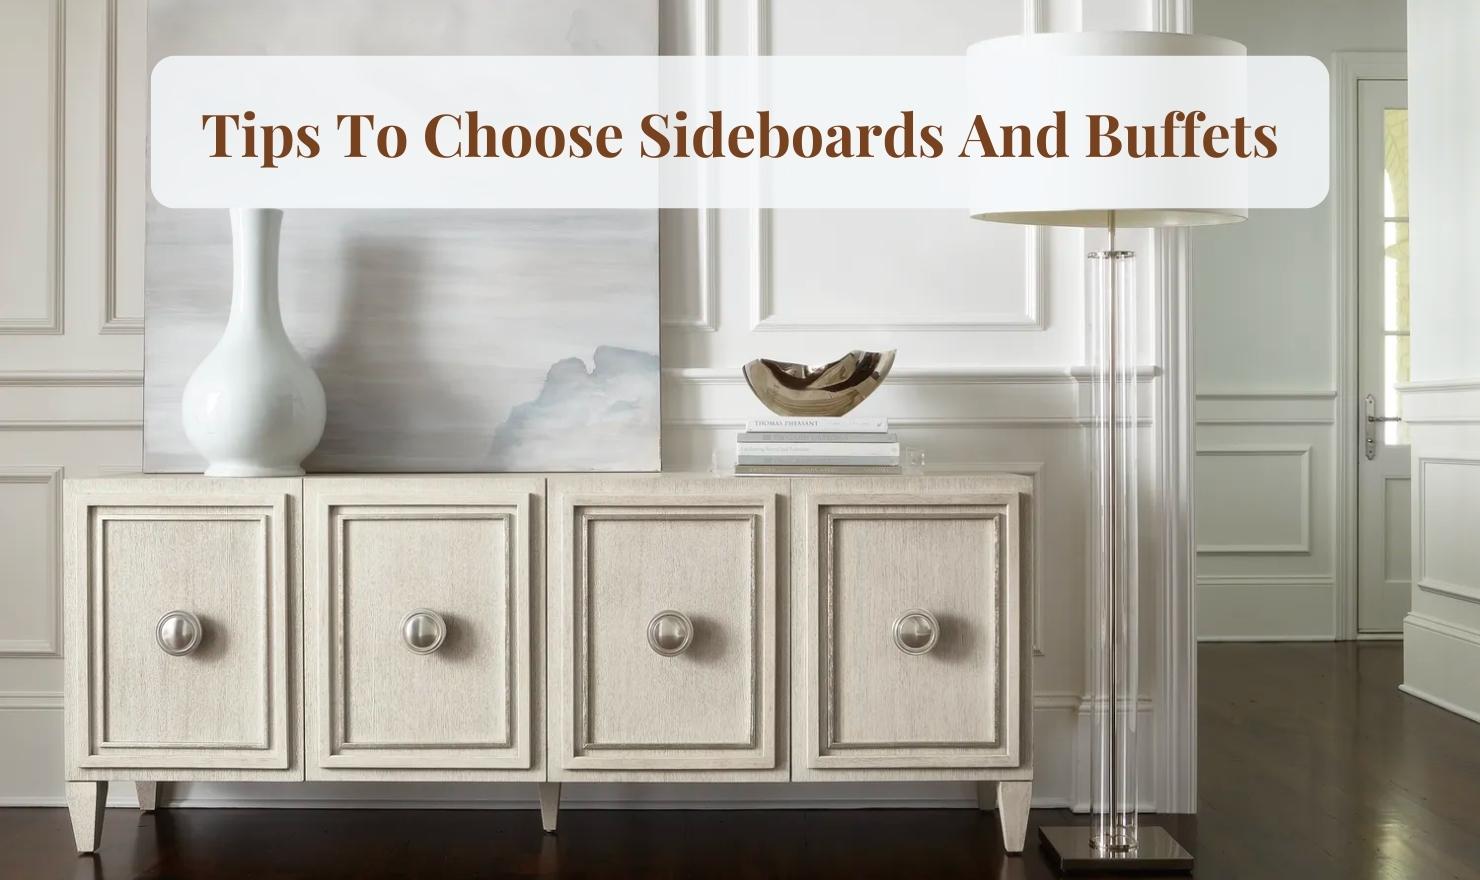 Tips To Choose Sideboards And Buffets